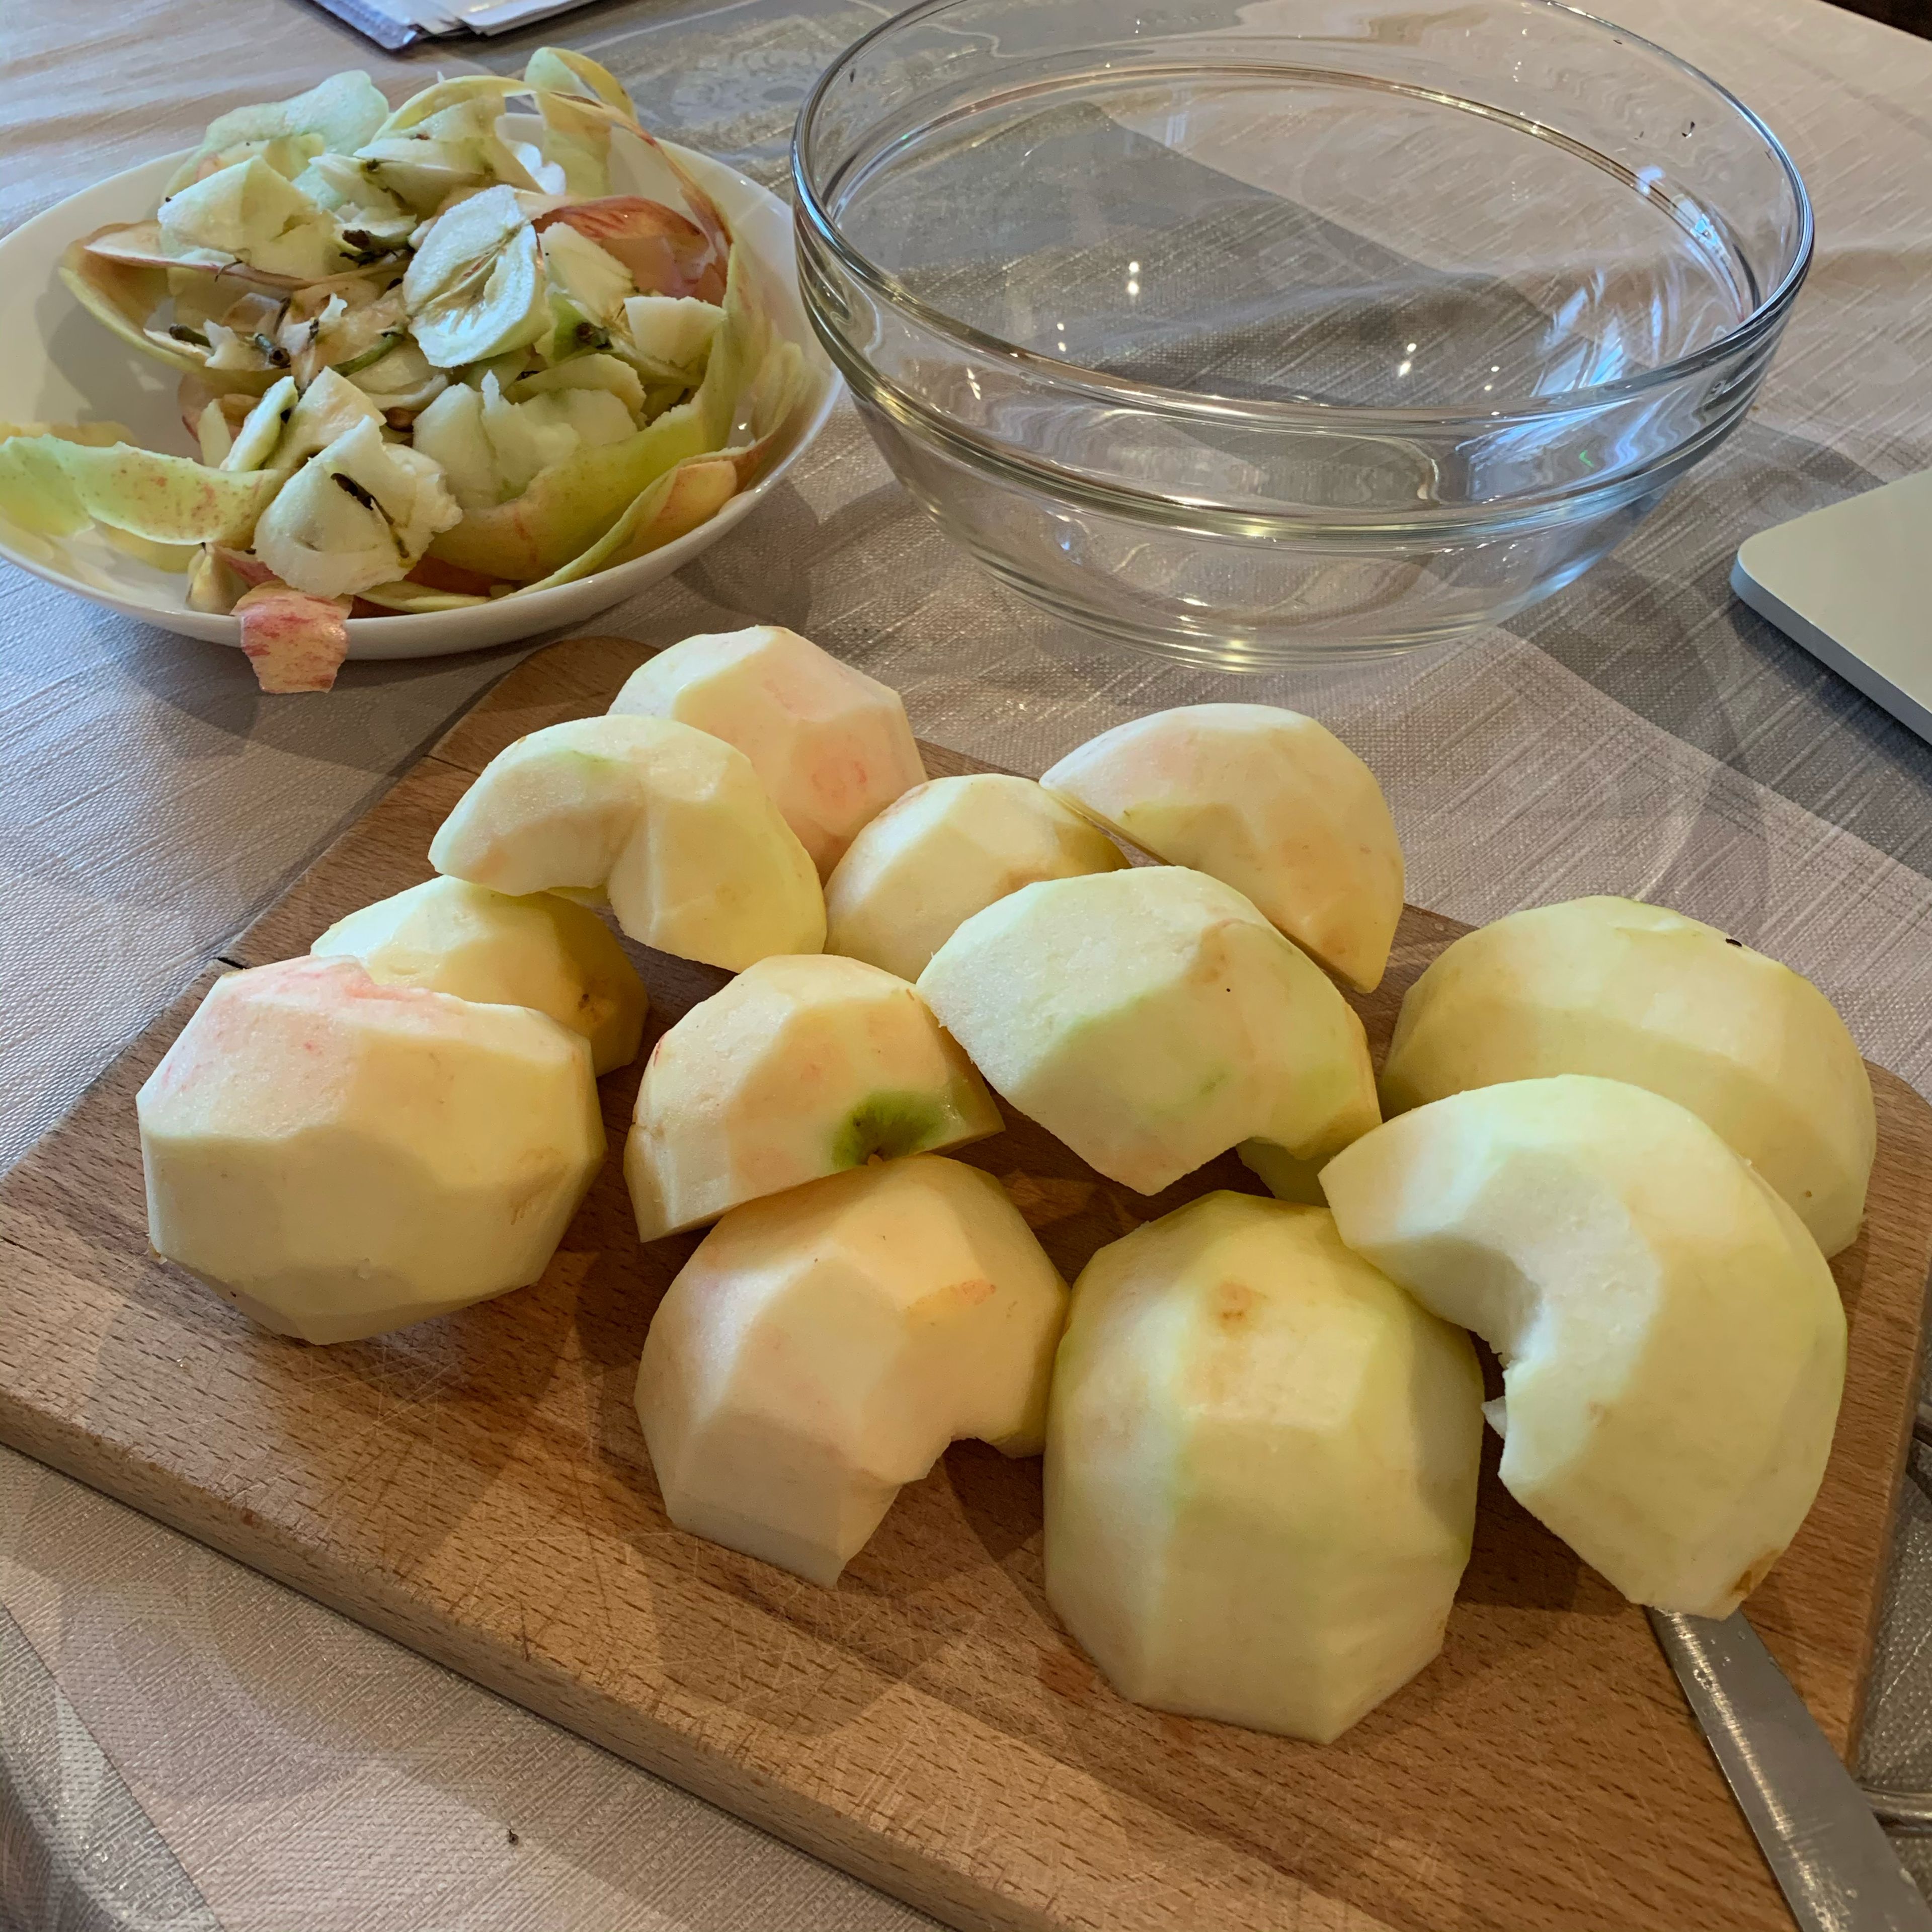 Peel and core apples, cut in two half’s and slice into pieces.